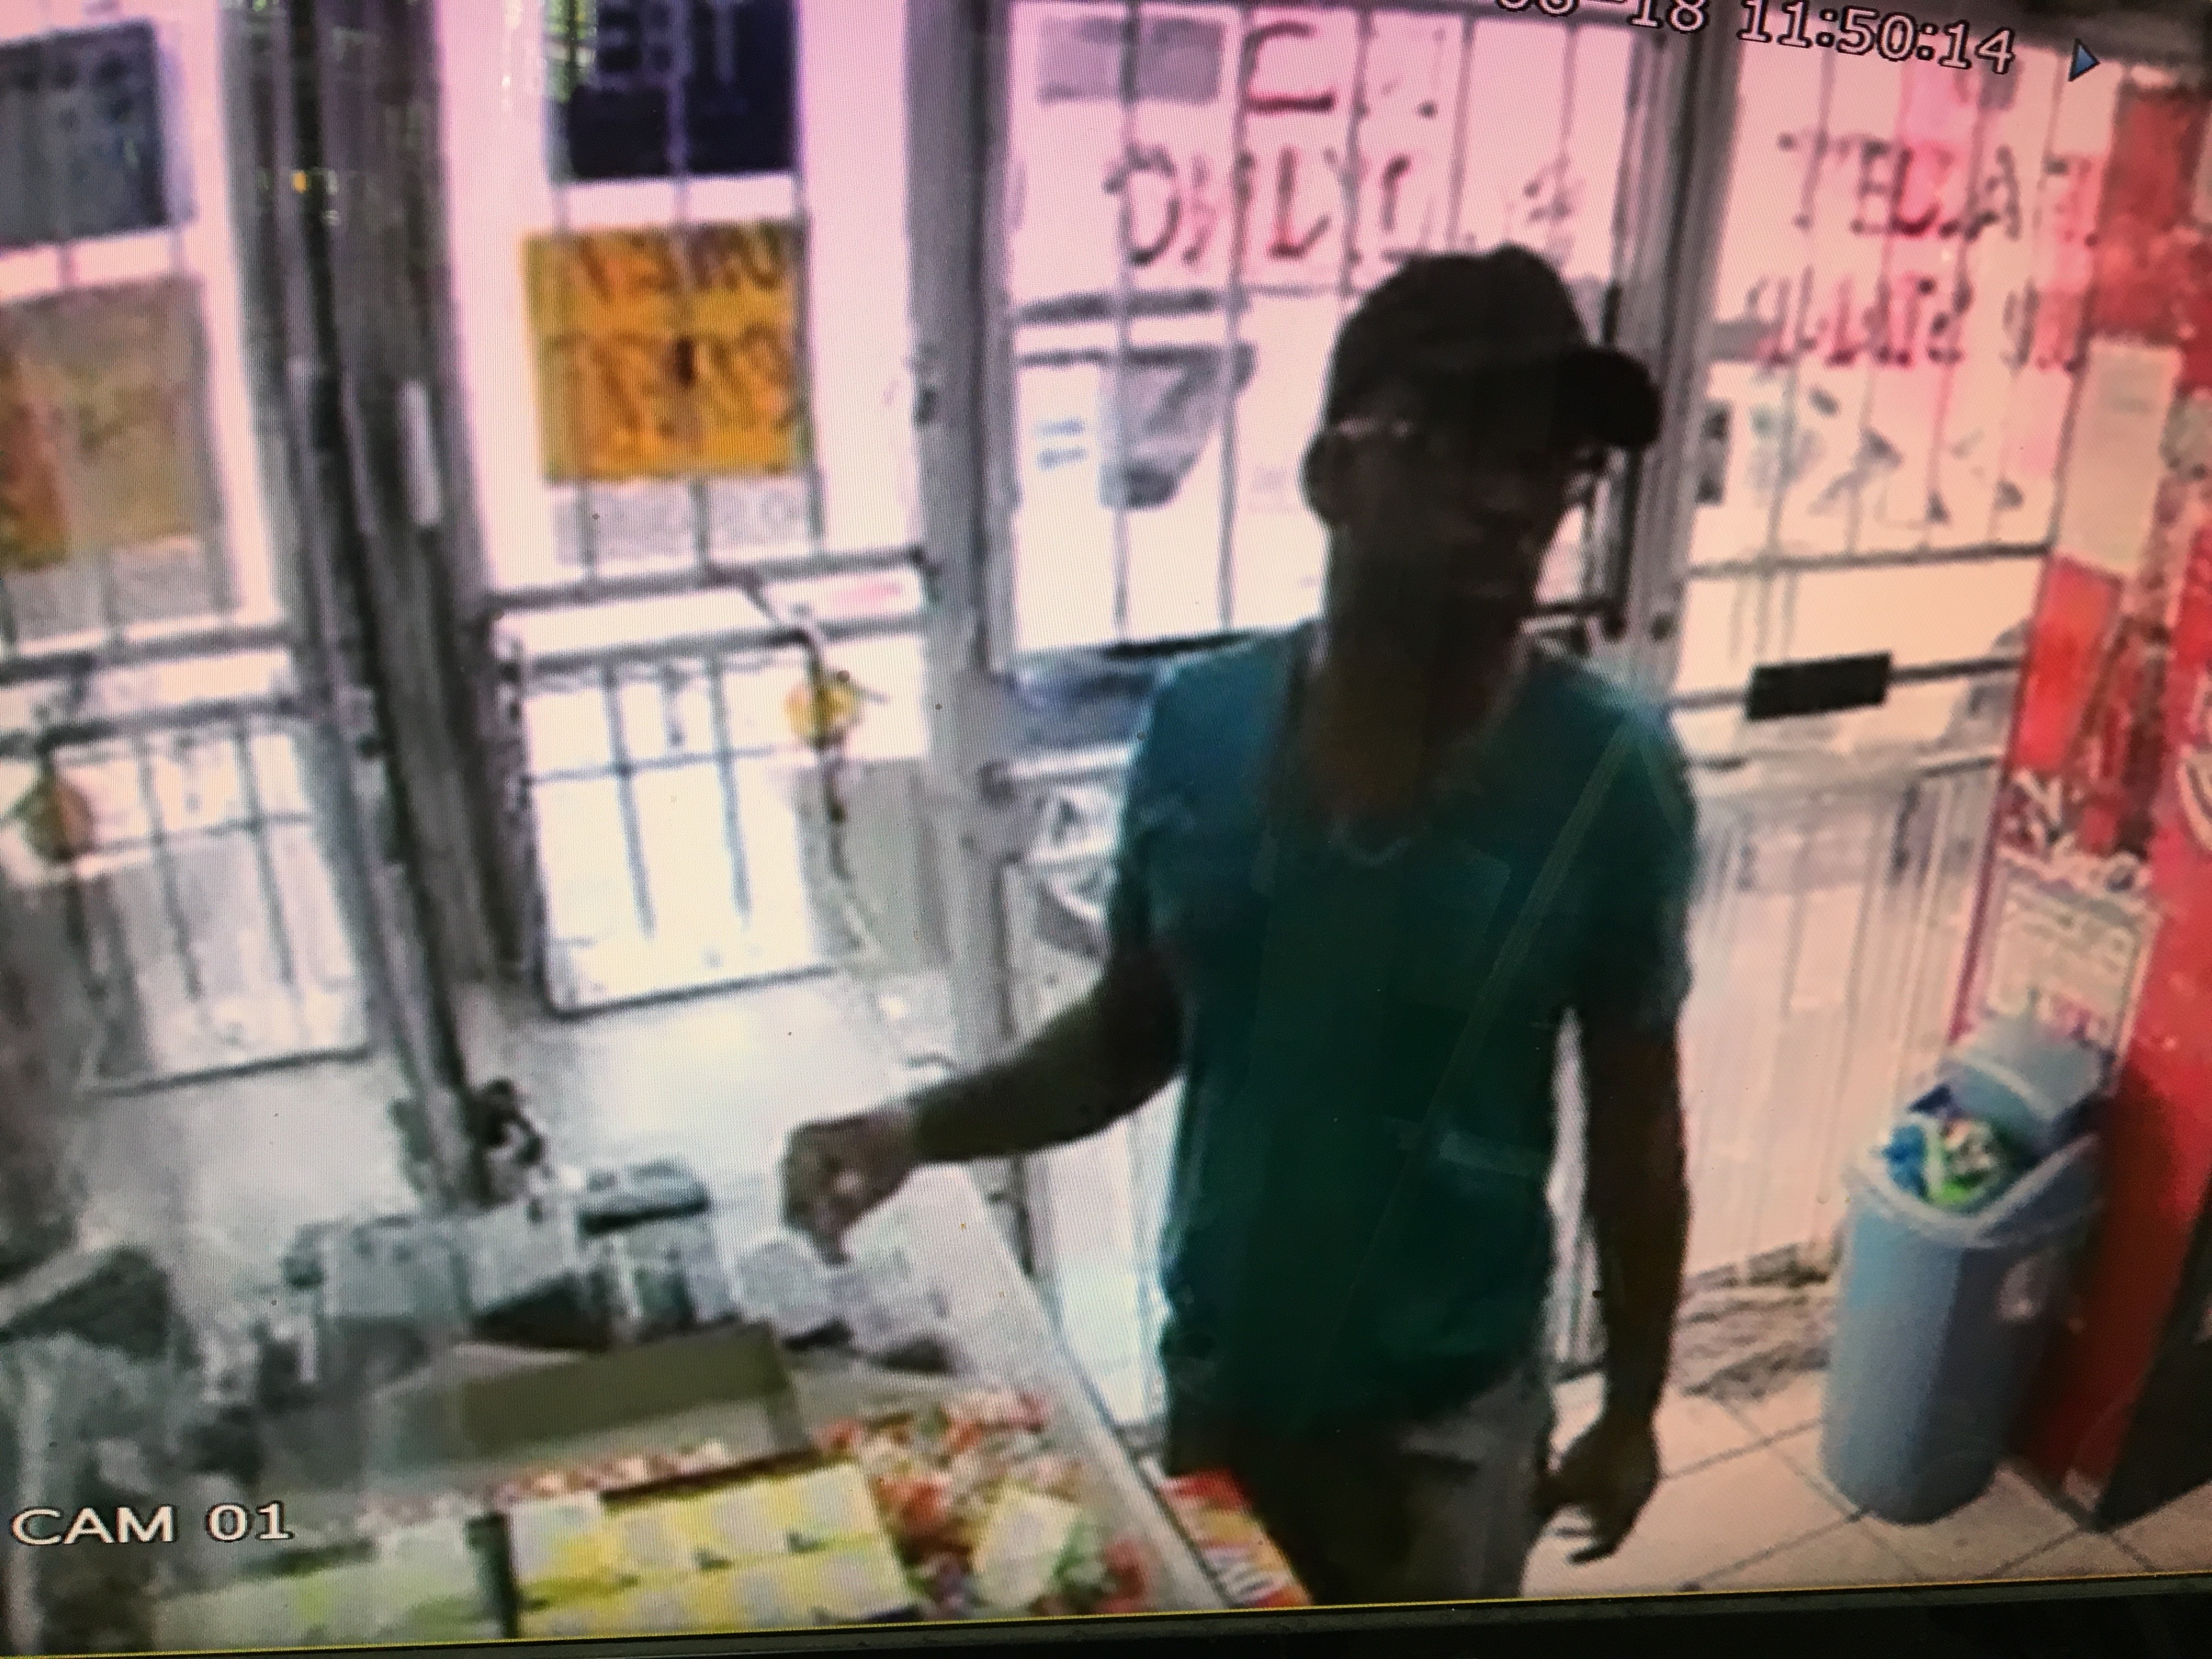 Birmingham police seek assistance with id of suspect in Lakewood area robbery, stabbing